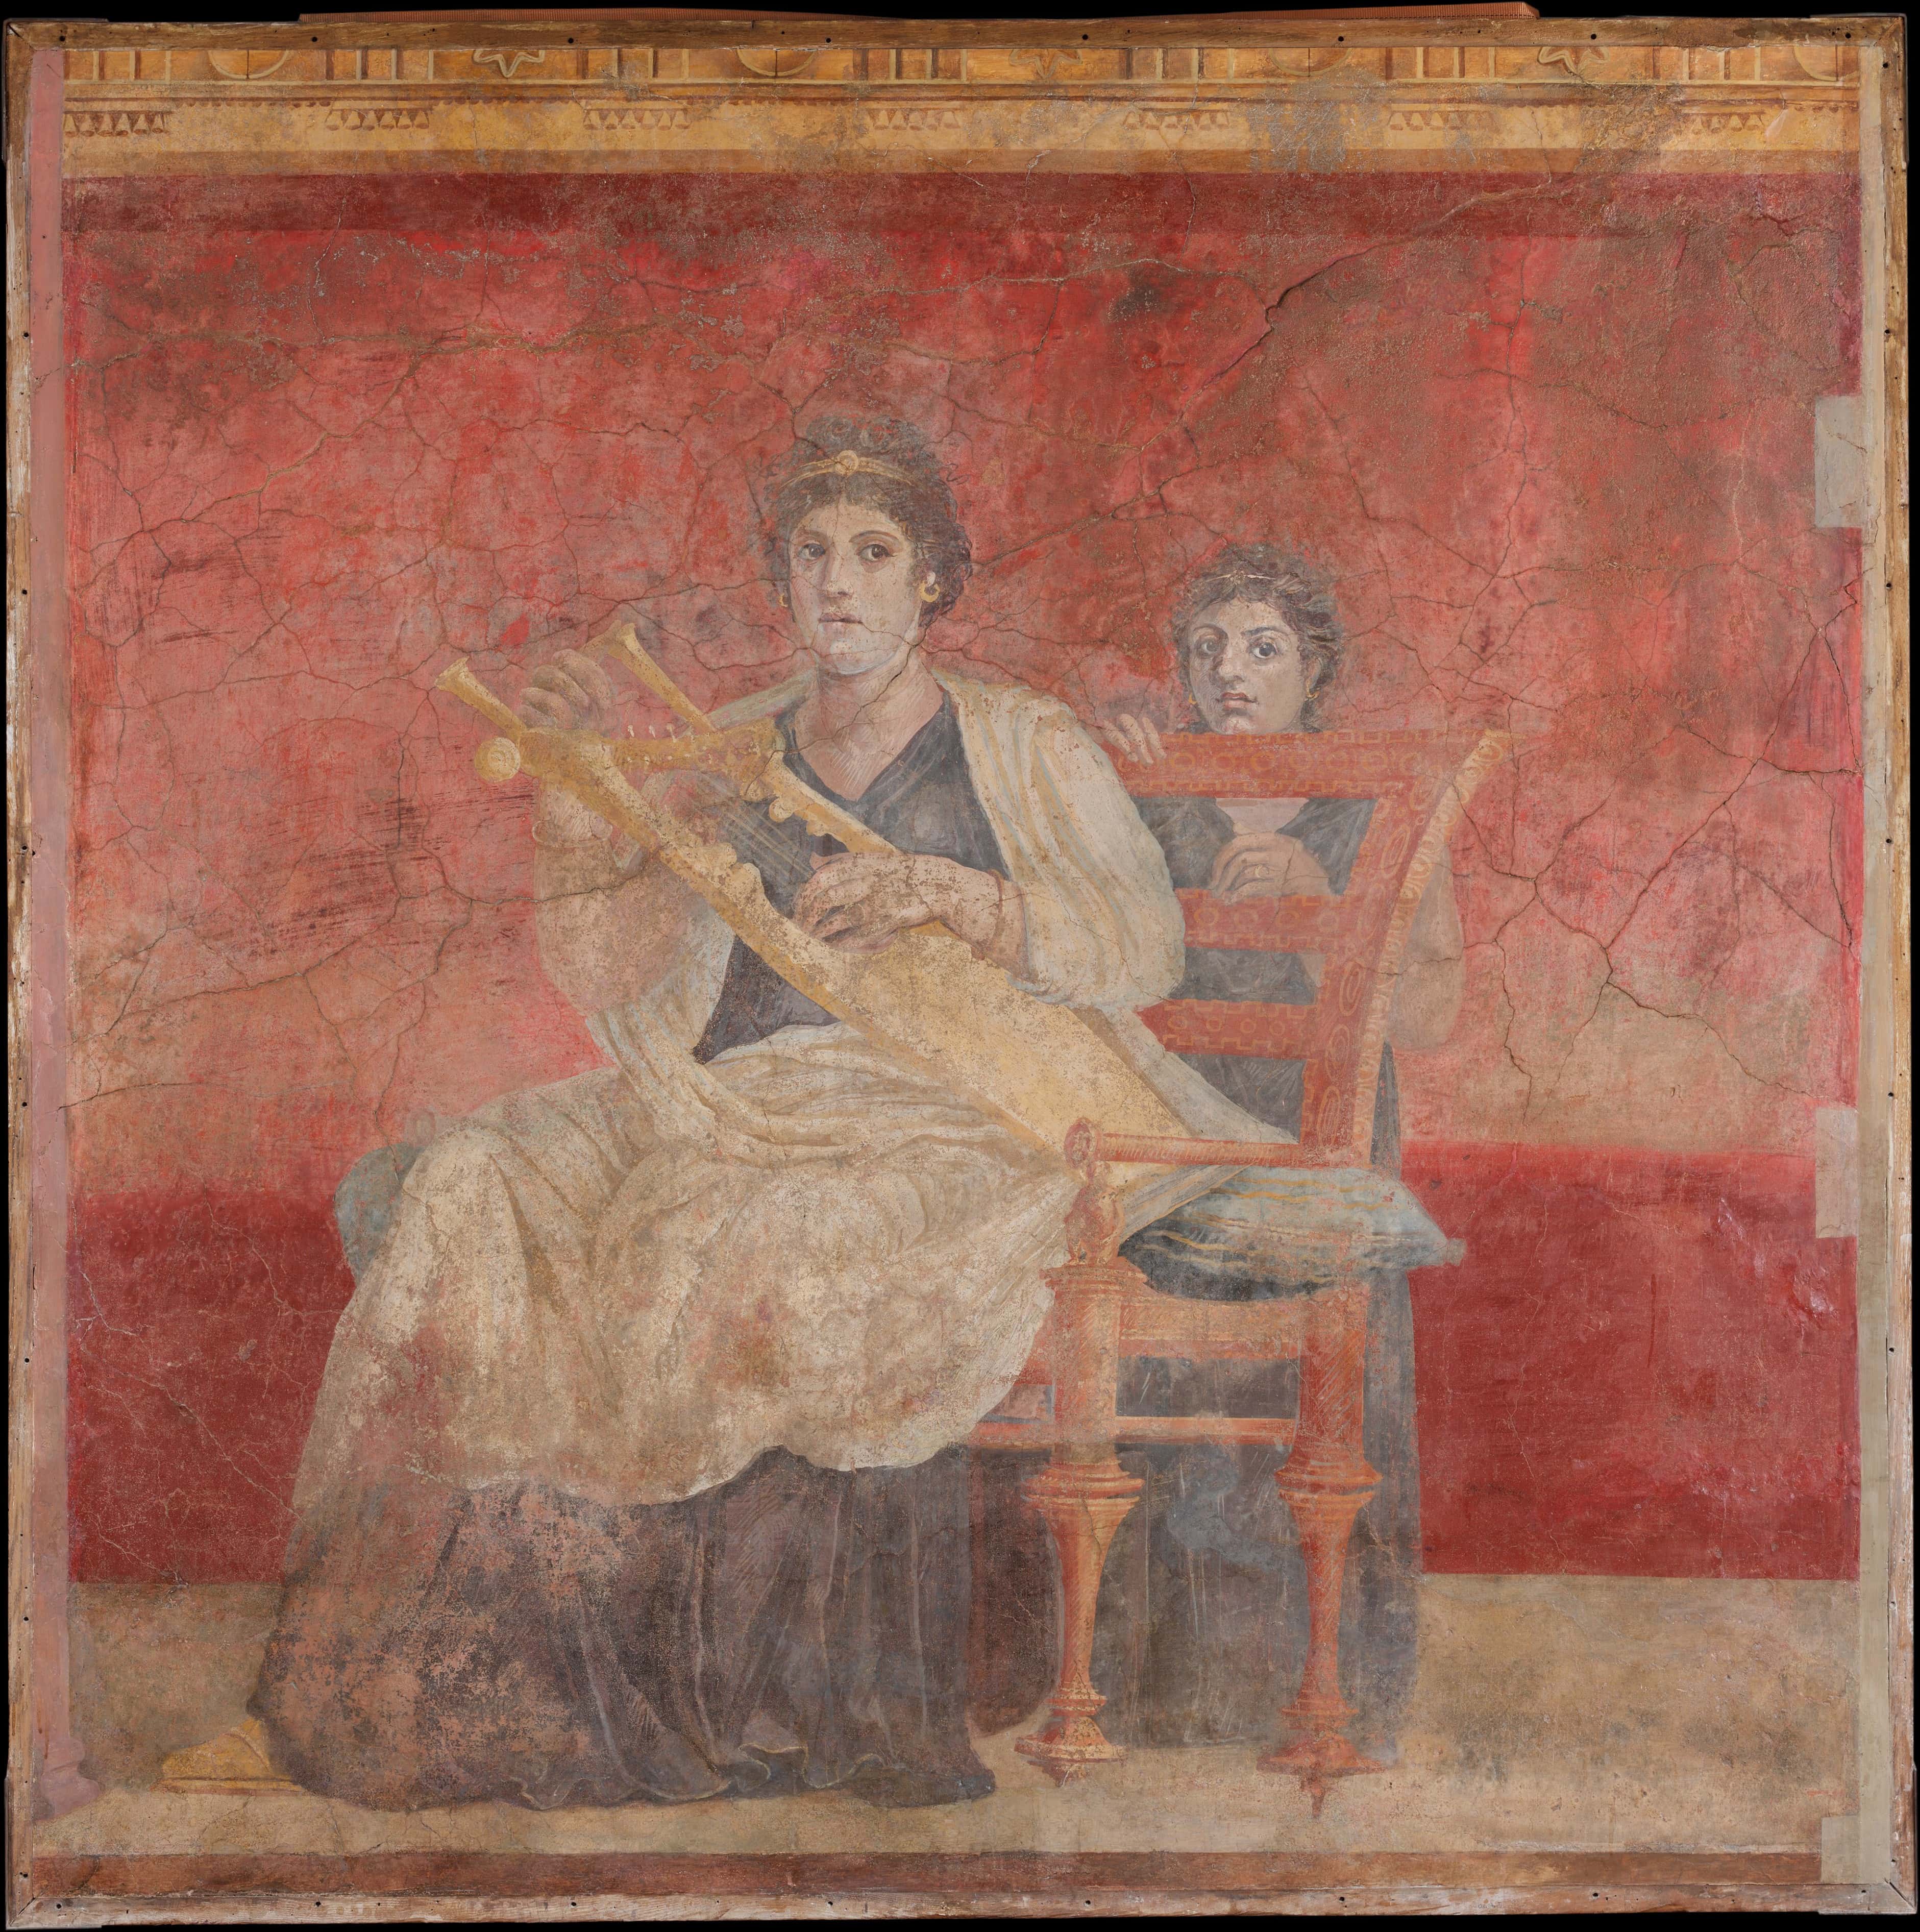 Wall painting from the villa of p. Fannius synistor at boscoreale, roman ca. 50–40 bce